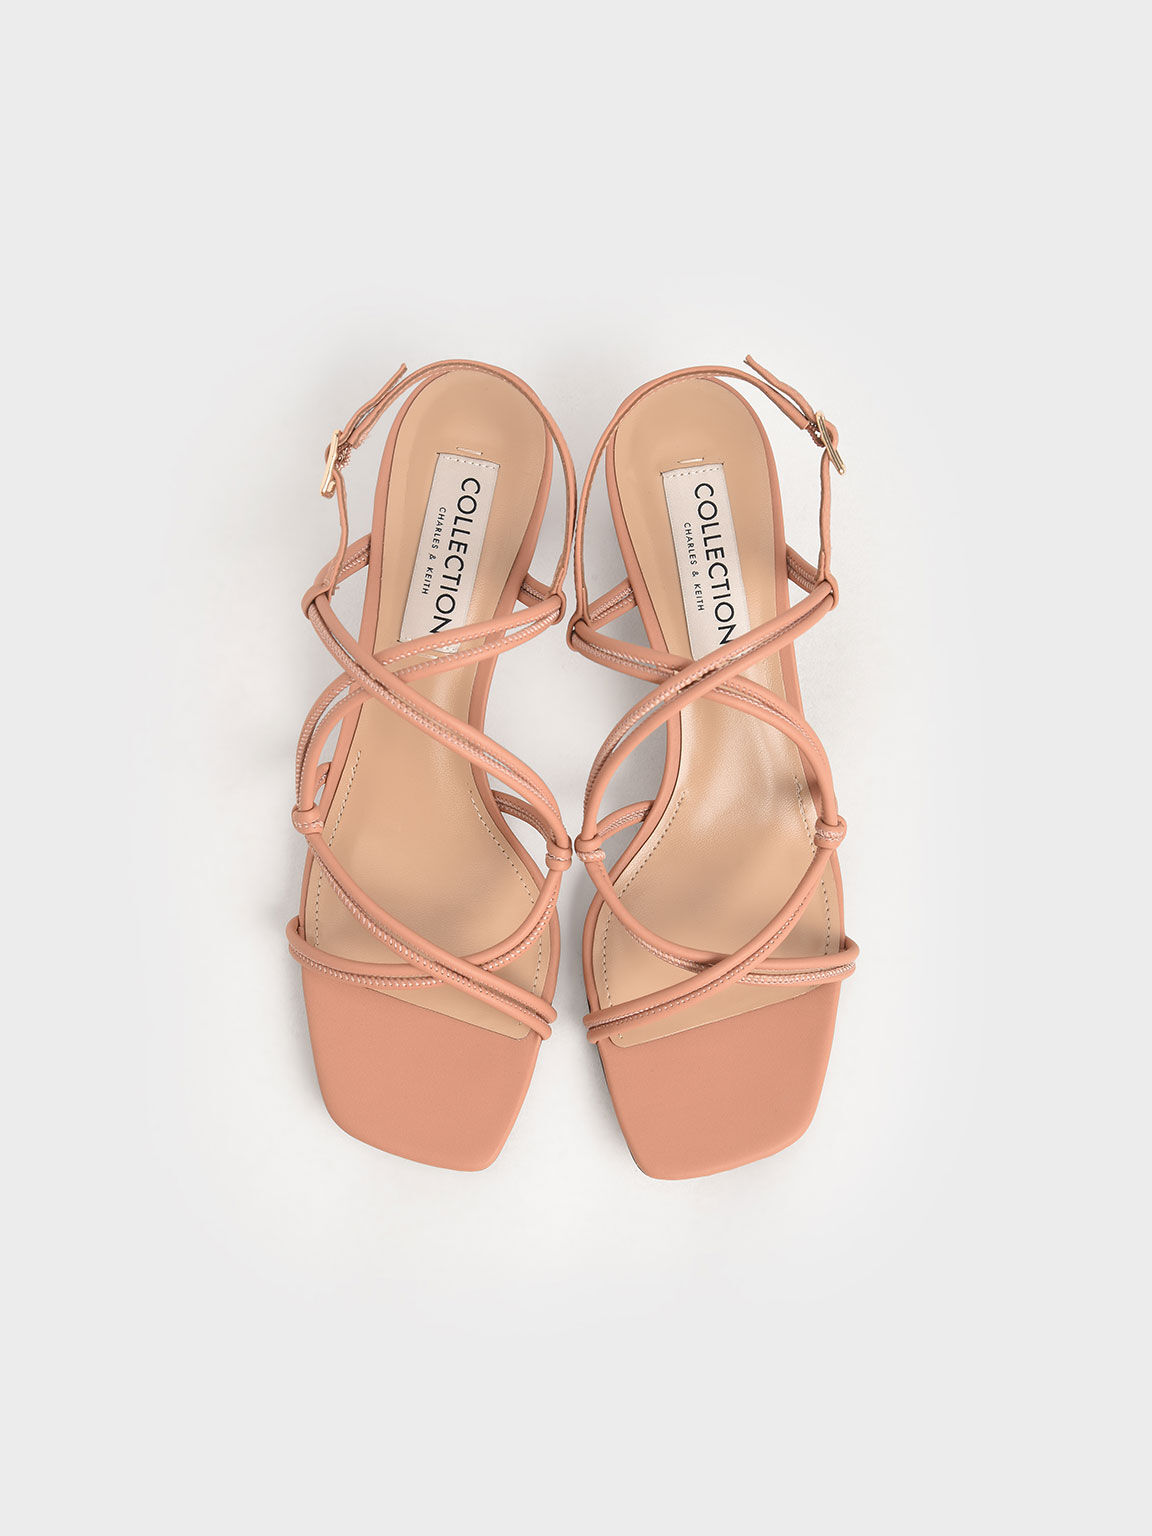 Leather Strappy Knotted Sandals, Tan, hi-res